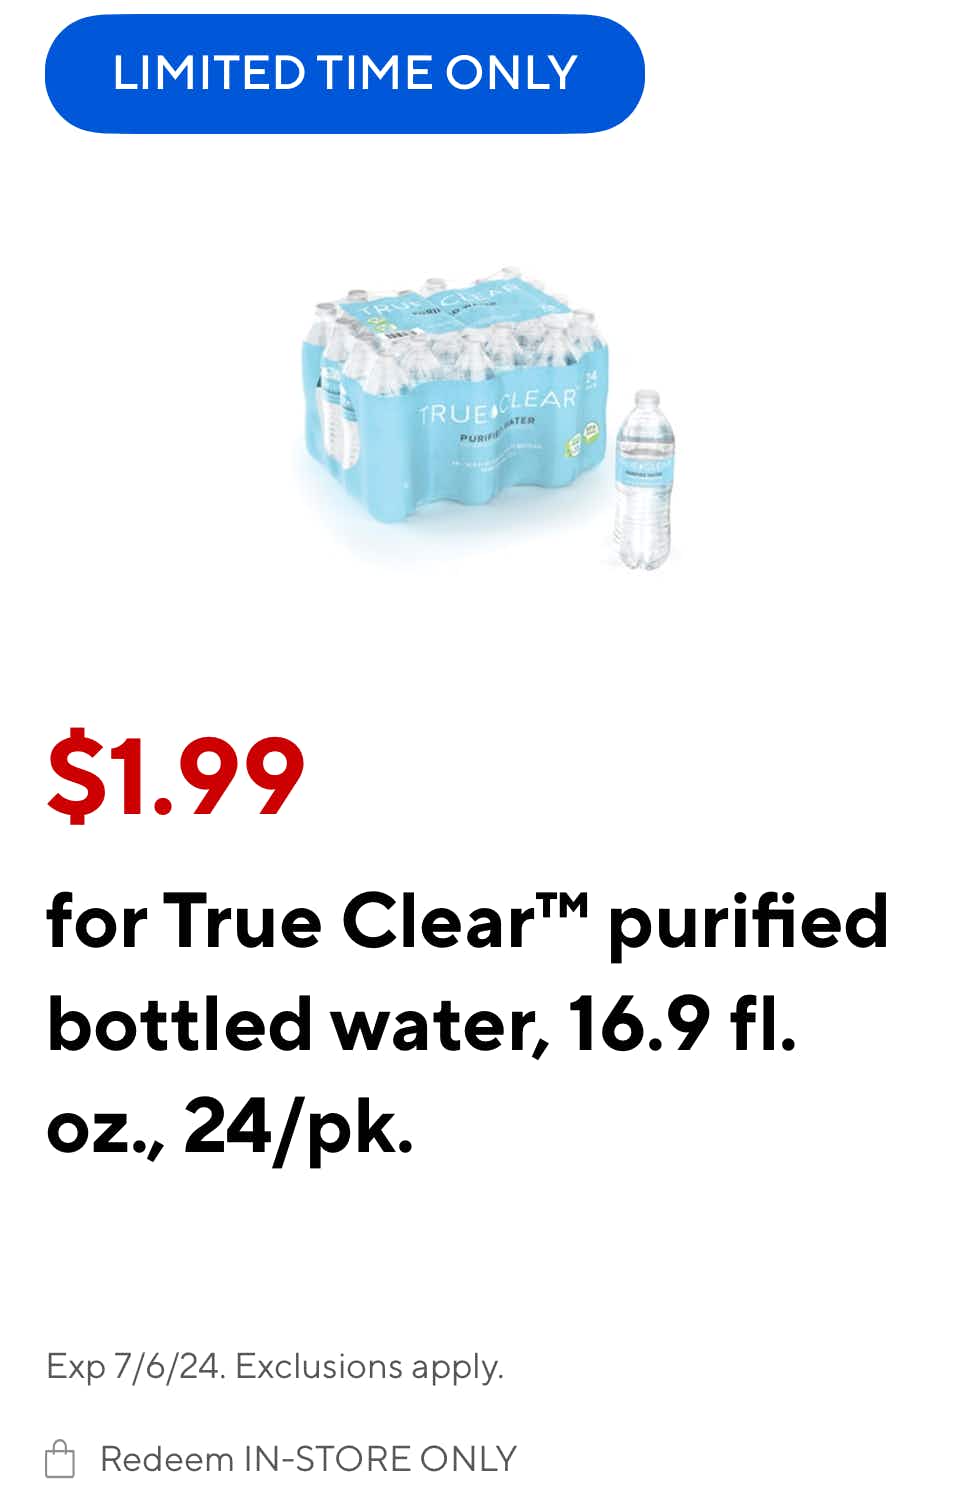 staples true clear water coupon